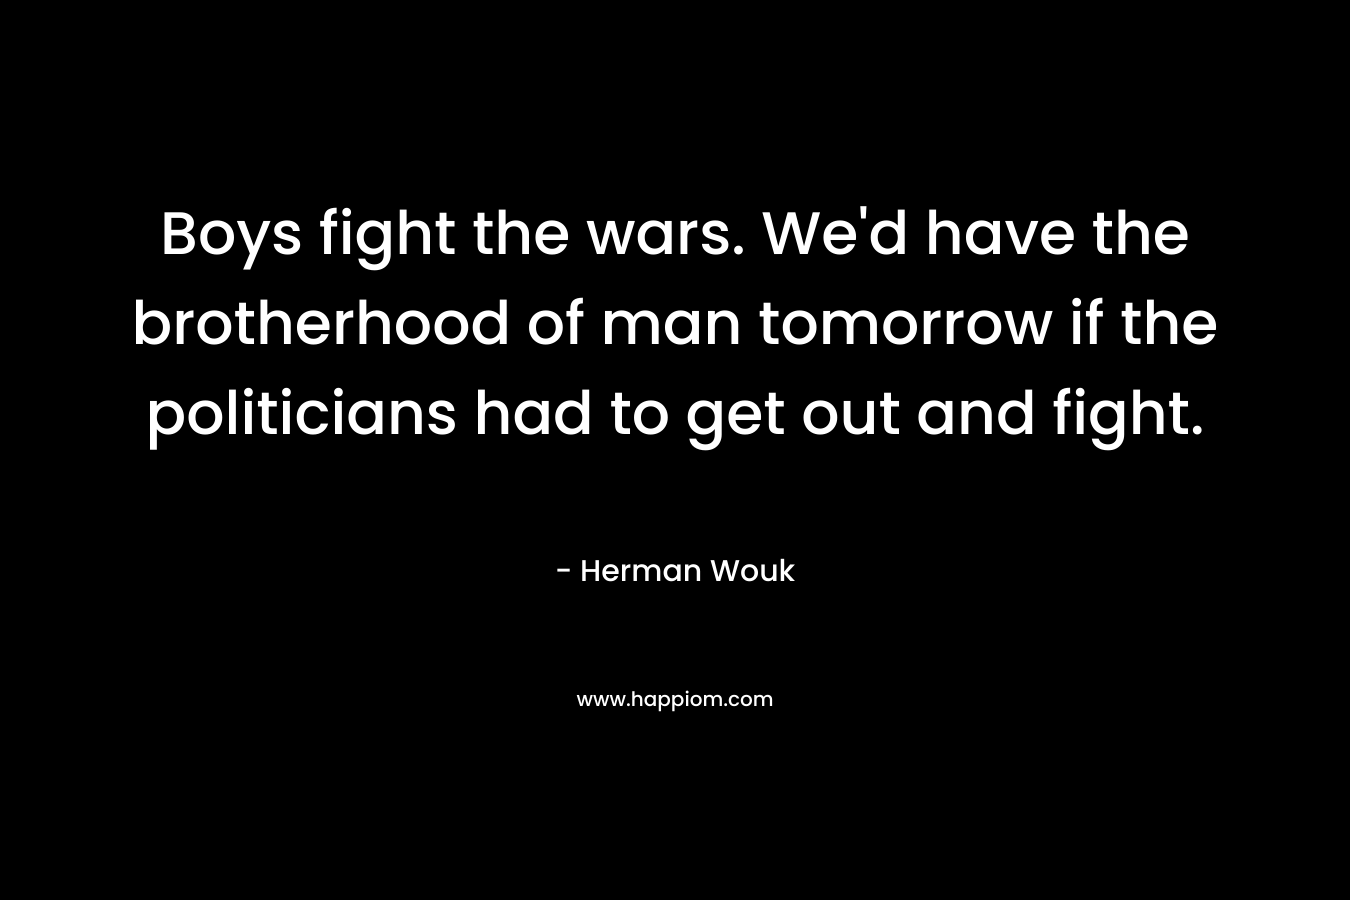 Boys fight the wars. We'd have the brotherhood of man tomorrow if the politicians had to get out and fight.